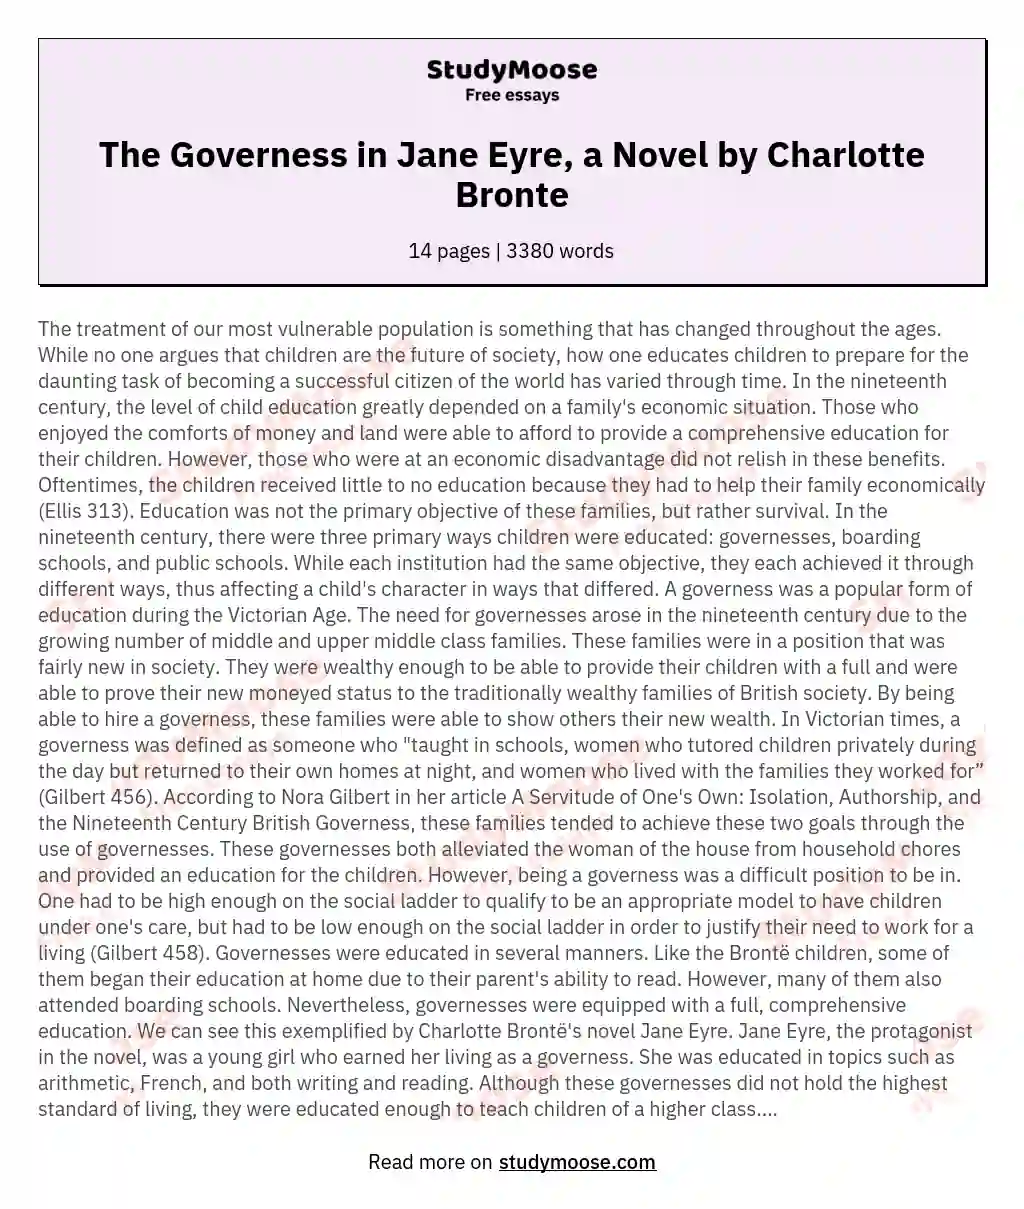 The Governess in Jane Eyre, a Novel by Charlotte Bronte essay